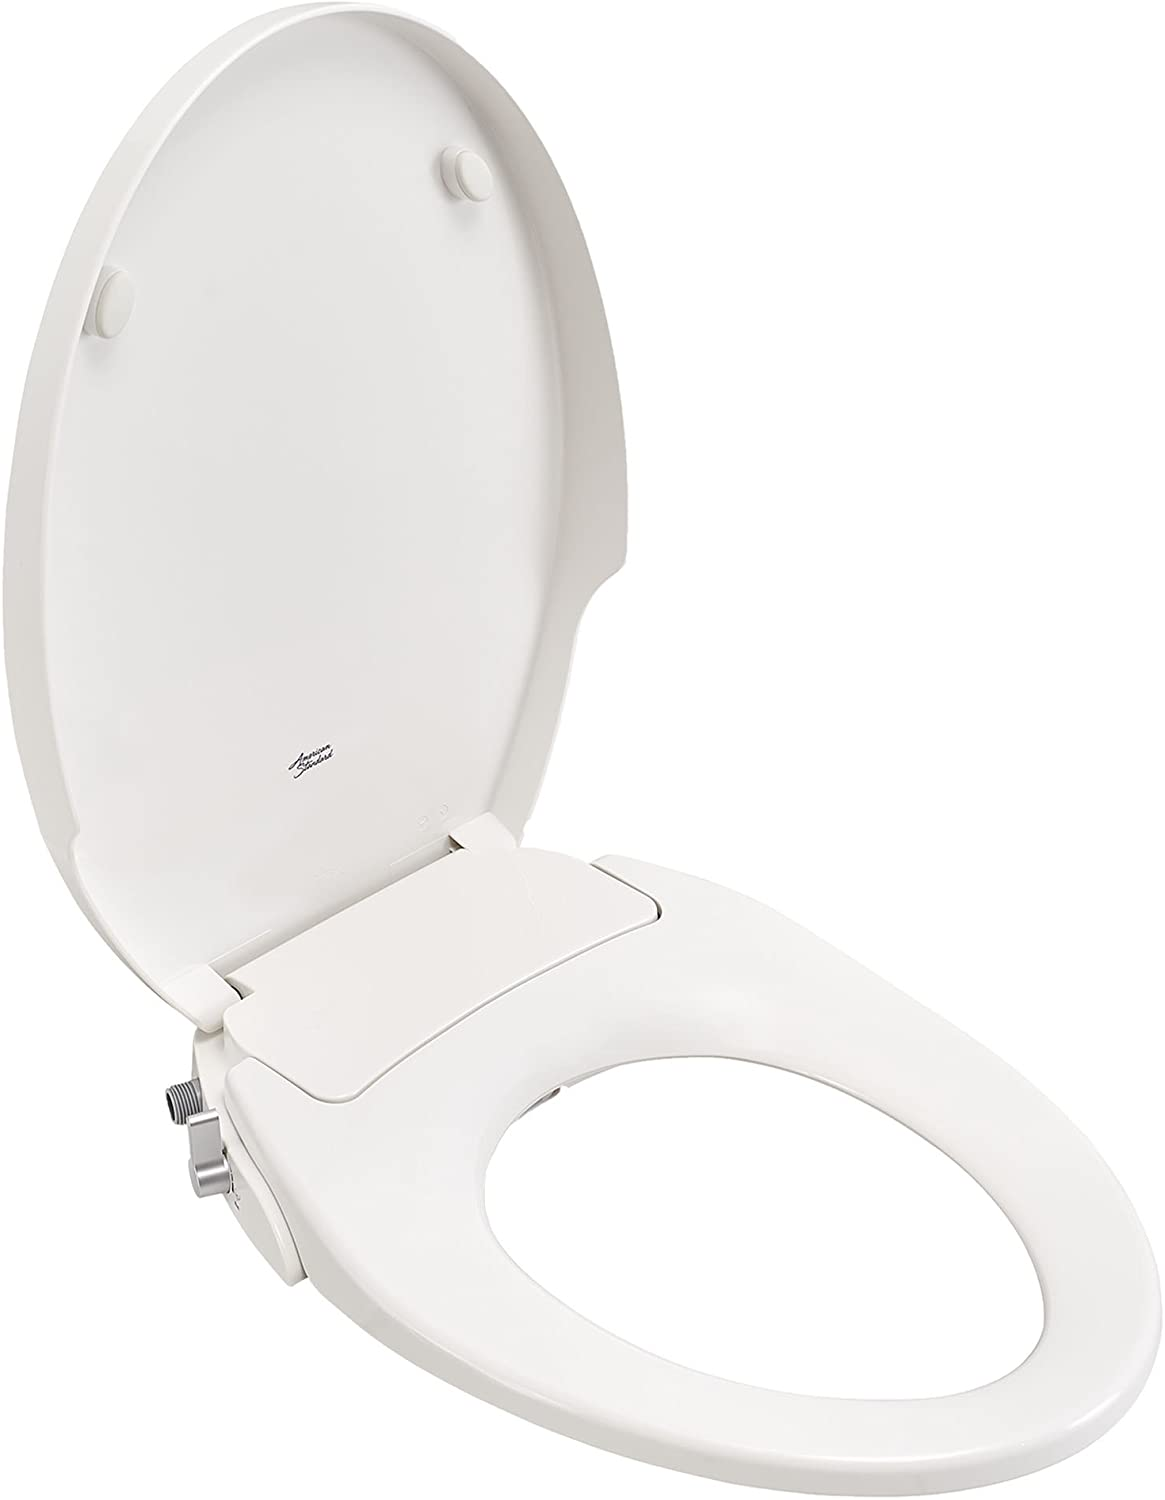 Amazon.com: American Standard 5900A05G.020 Aqua Wash Non-Electric Bidet Seat for Elongated Toilets, 14.9 in Wide x 3.6 in Tall x 21.1 in Deep, White : Everything Else $49.99